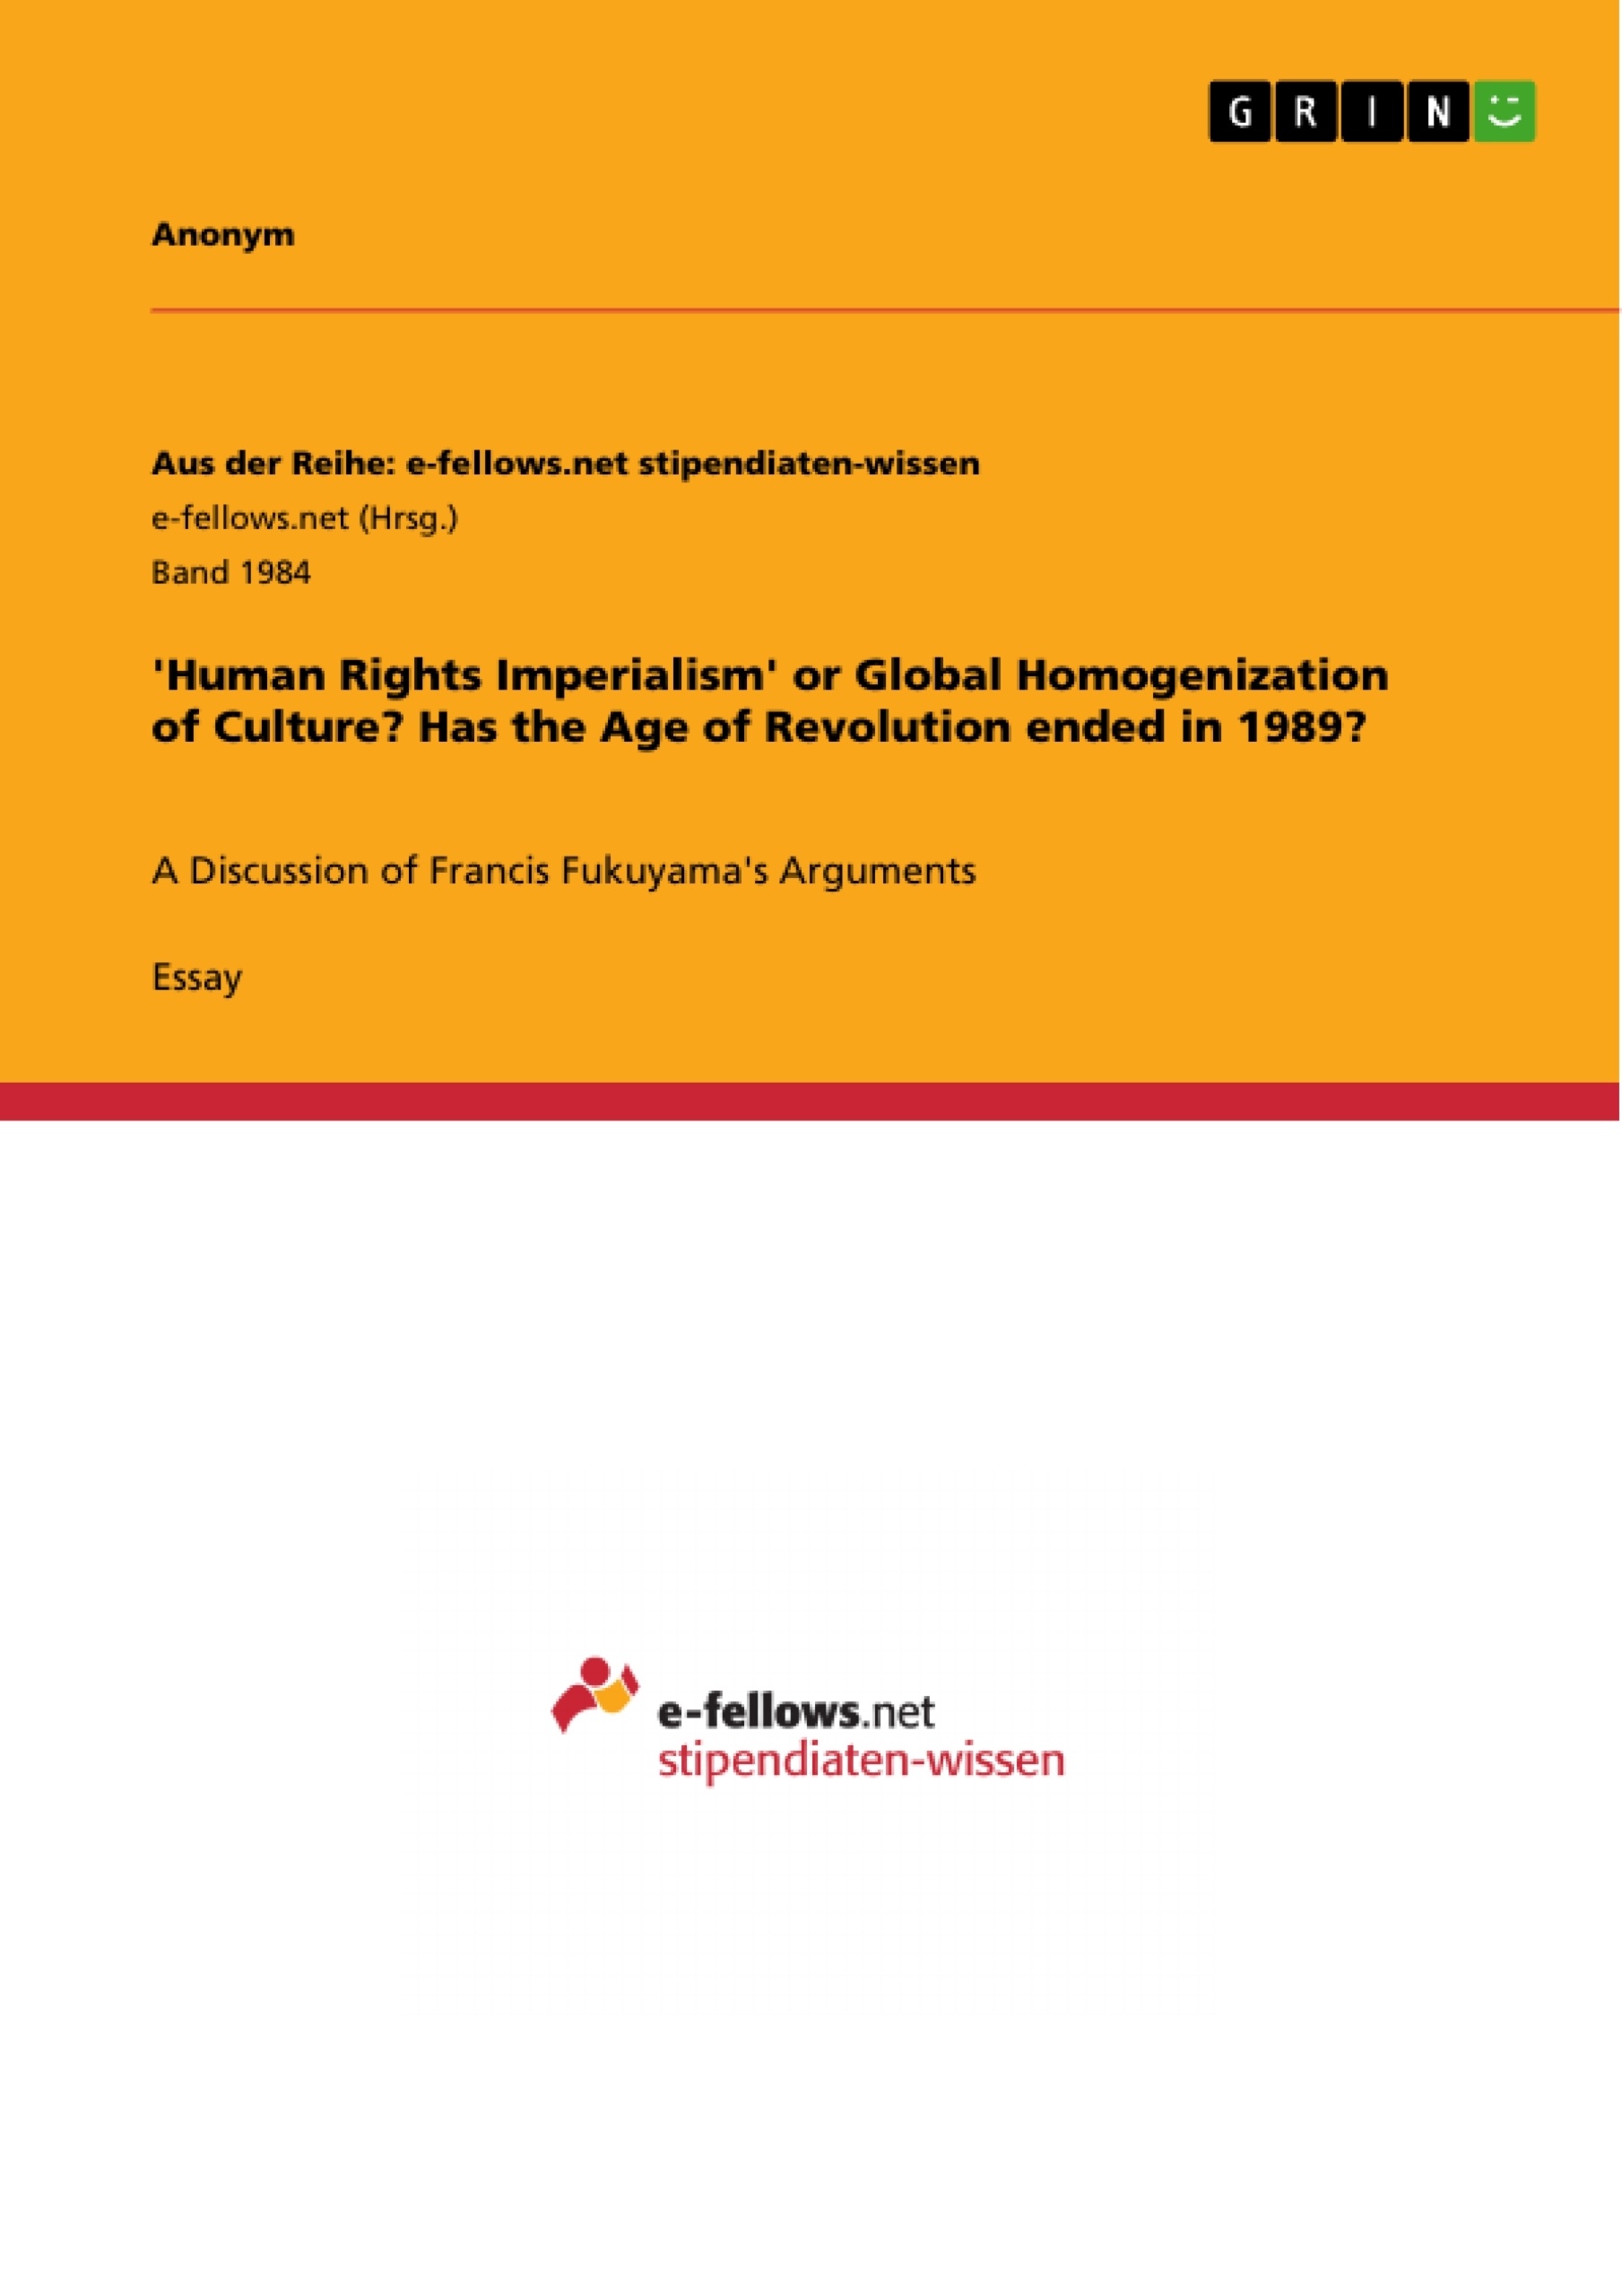 Titre: 'Human Rights Imperialism' or Global Homogenization of Culture? Has the Age of Revolution ended in 1989?